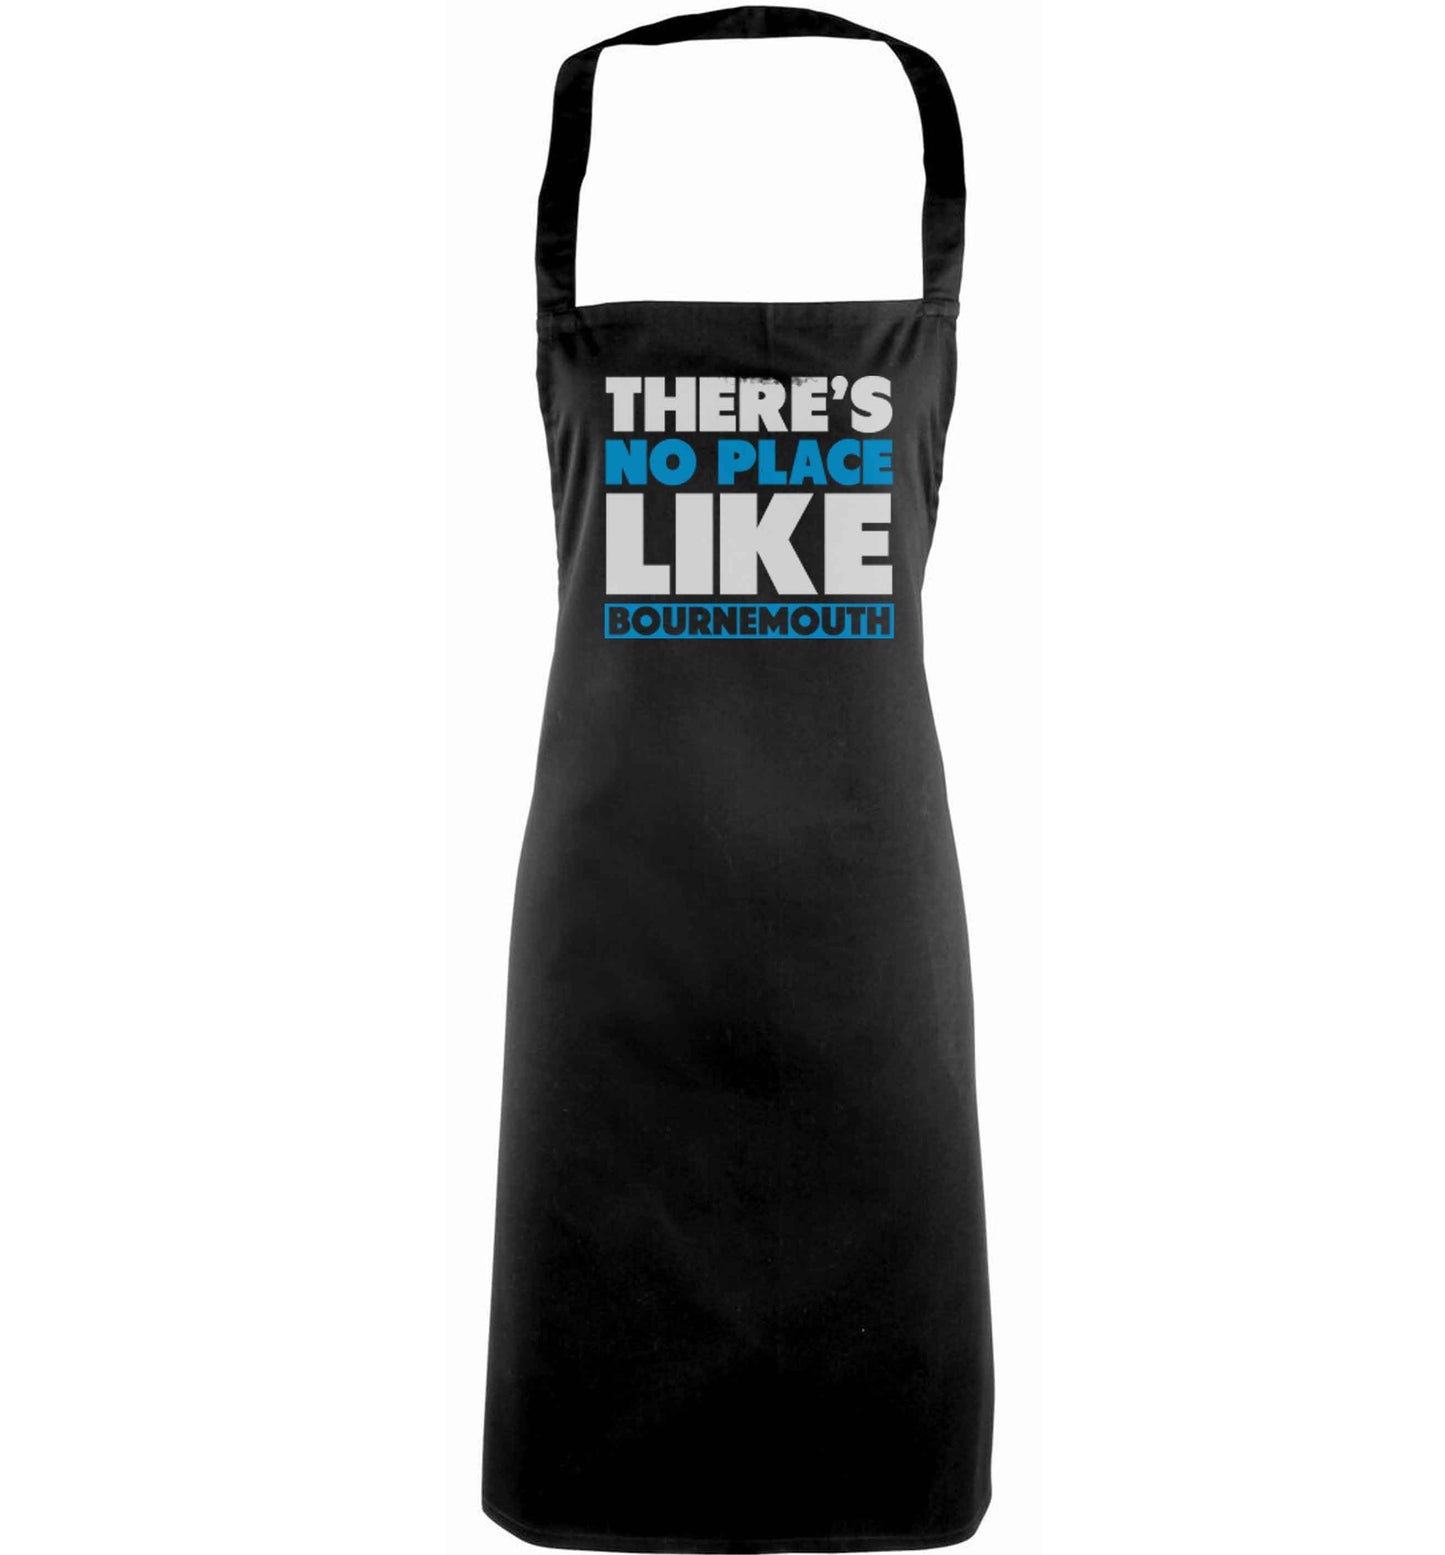 There's no place like Bournemouth adults black apron